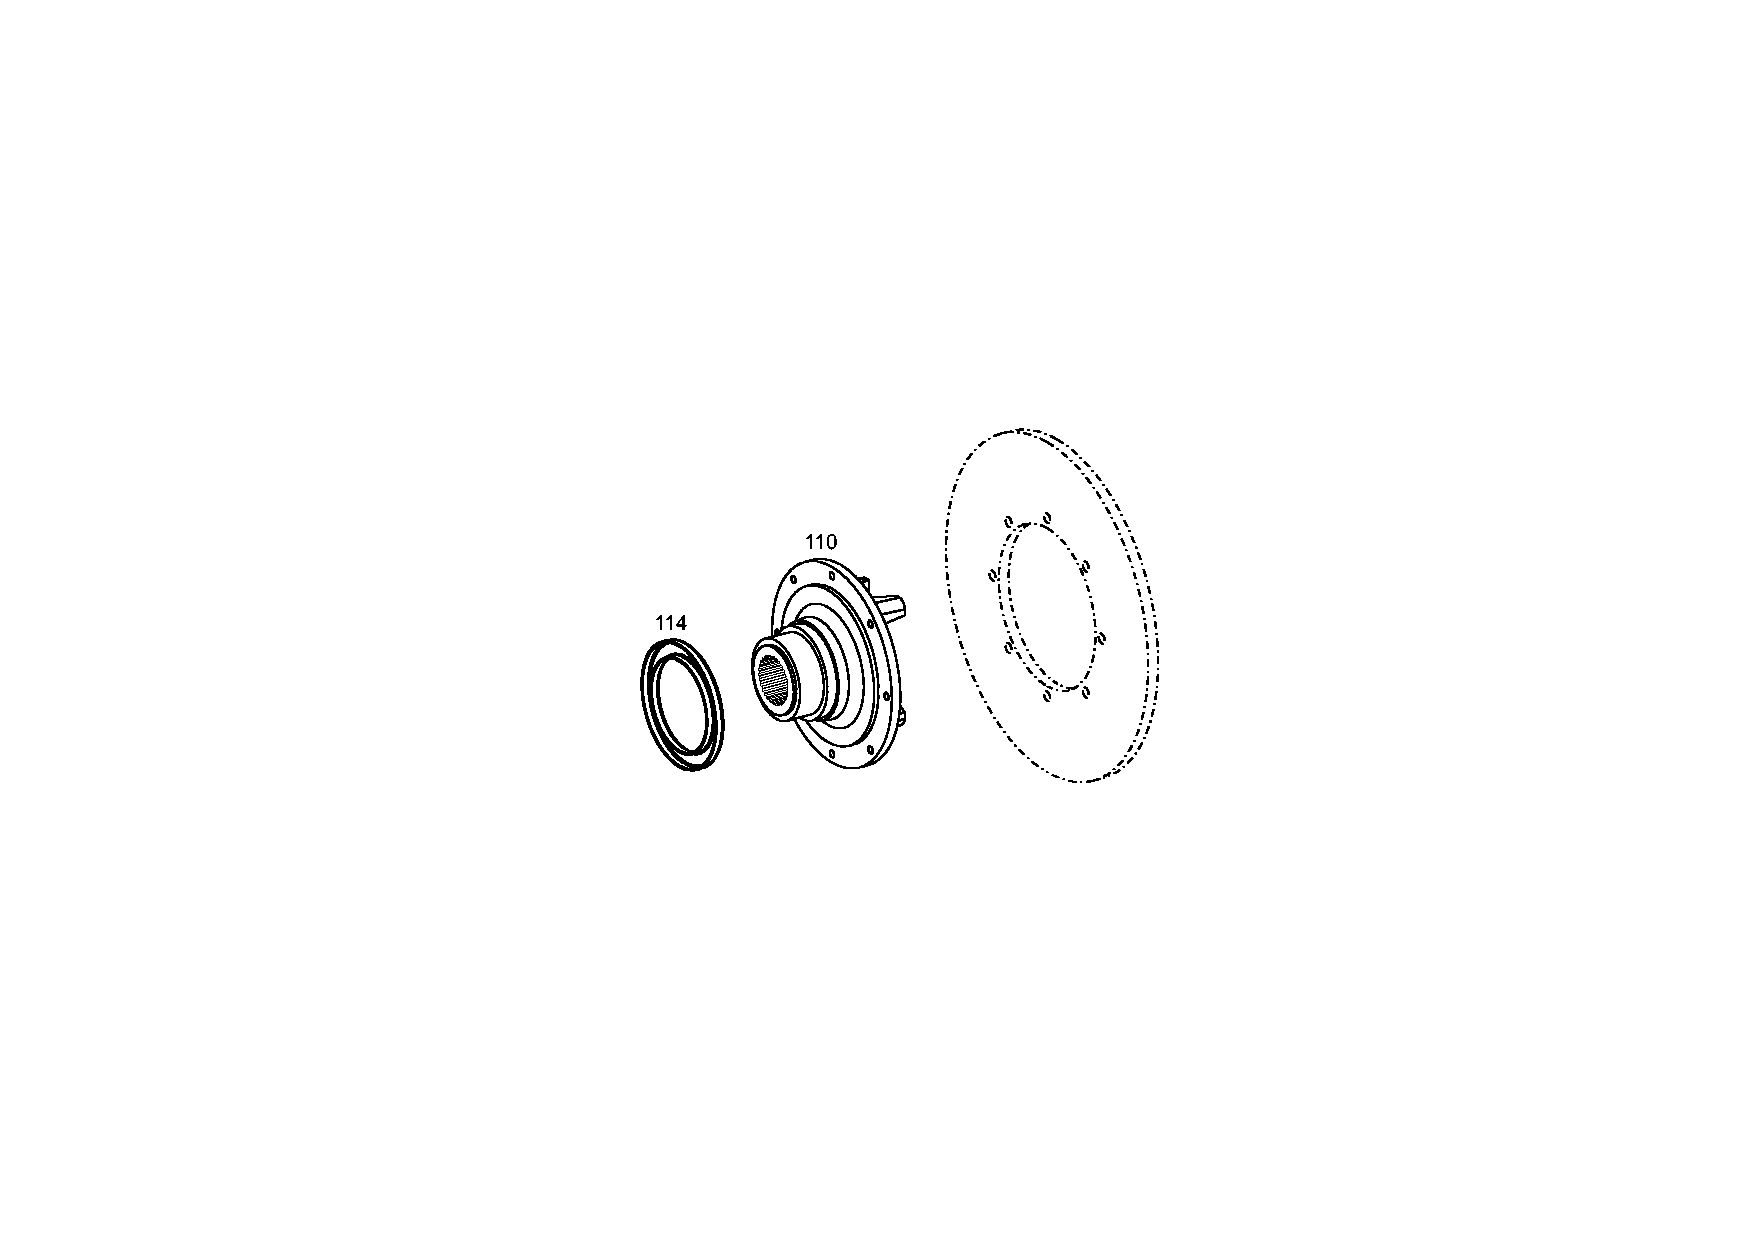 drawing for CNH NEW HOLLAND 86989637 - OUTPUT FLANGE (figure 2)